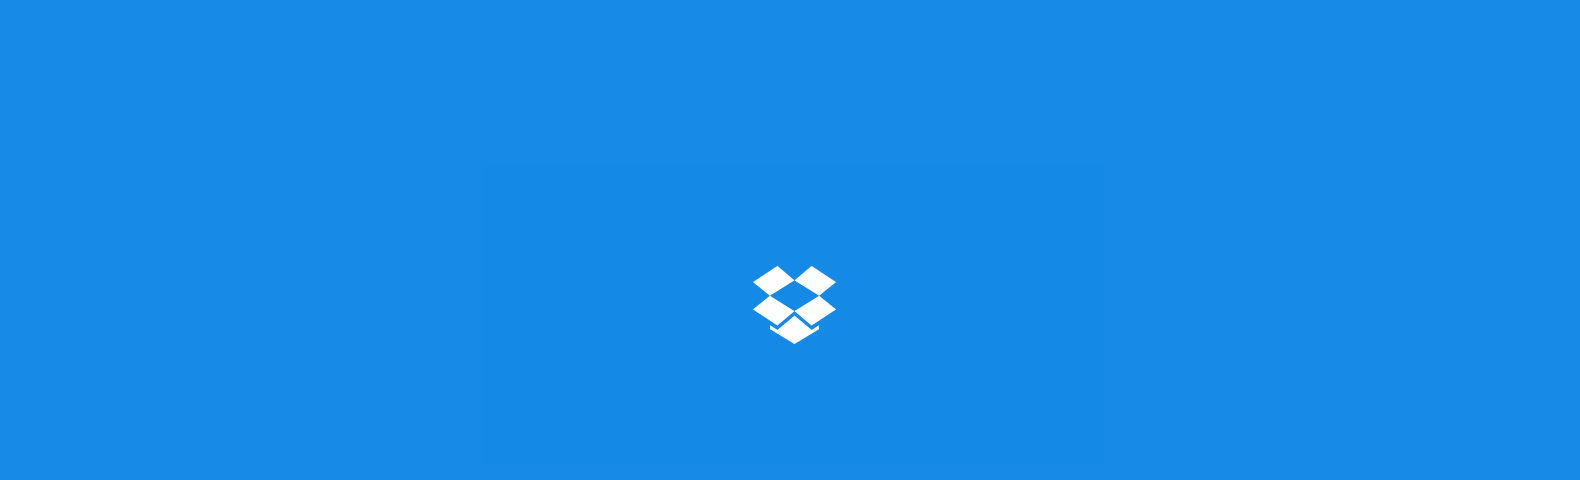 Dropbox CLI: How to whitelist folders for selective sync